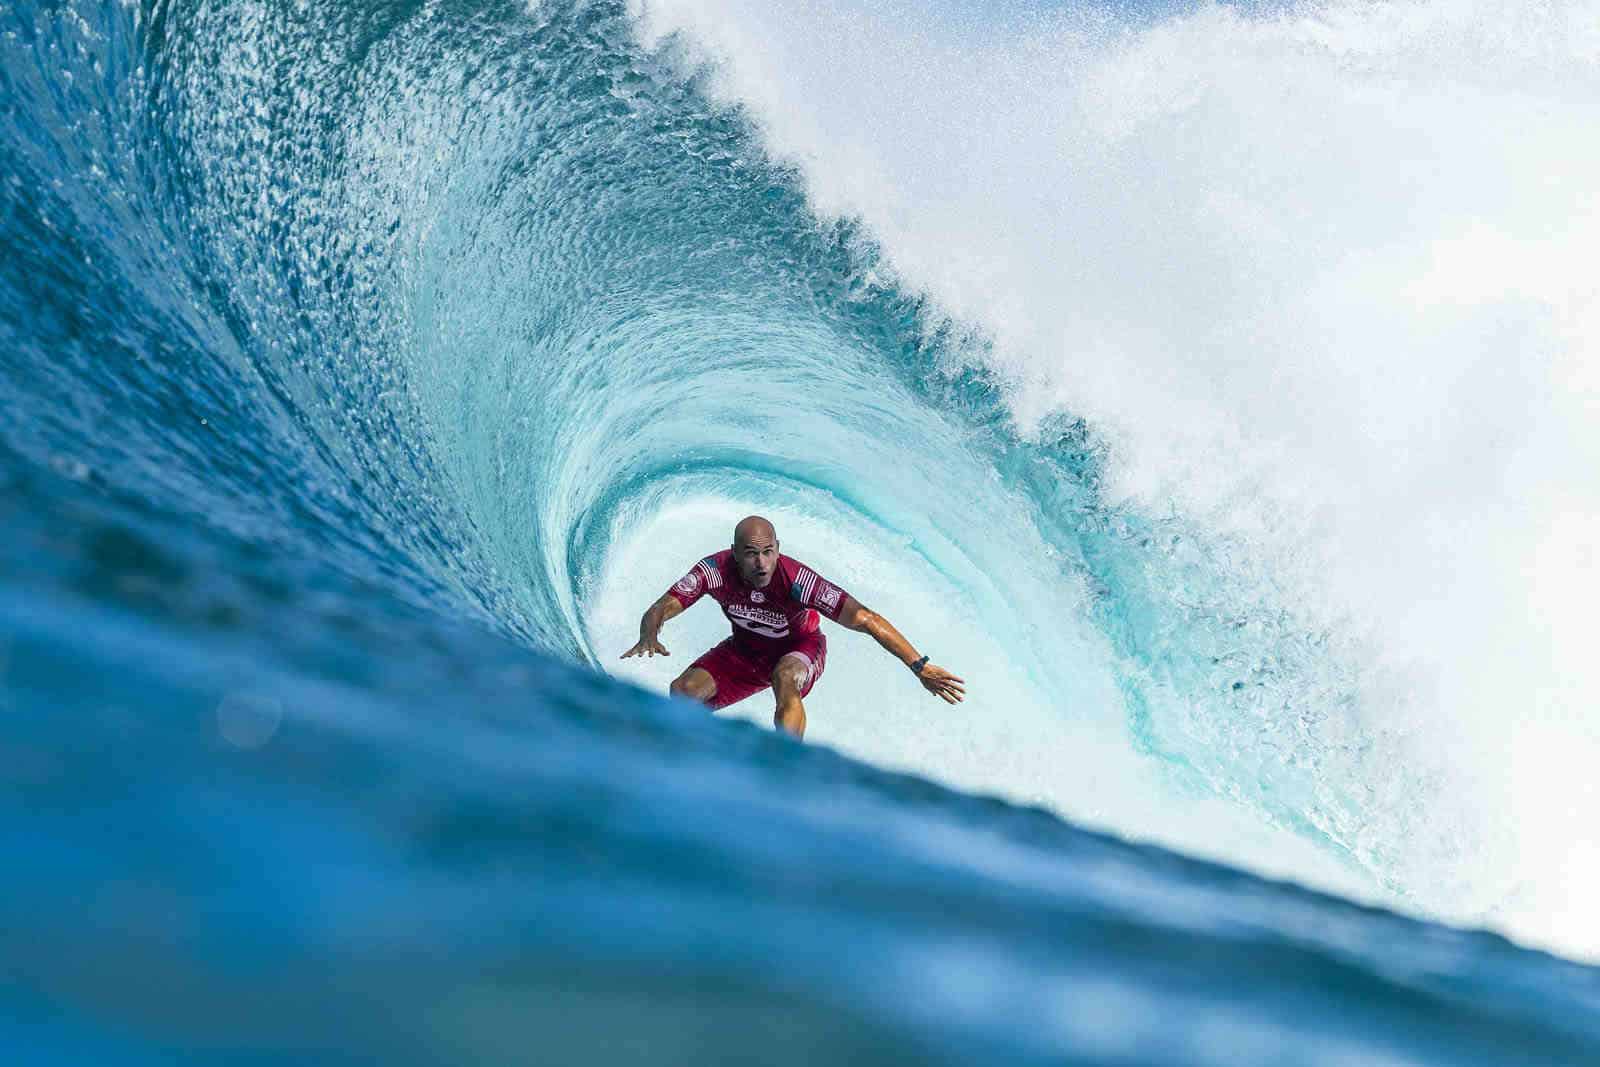 Is Kelly Slater the greatest athlete ever?